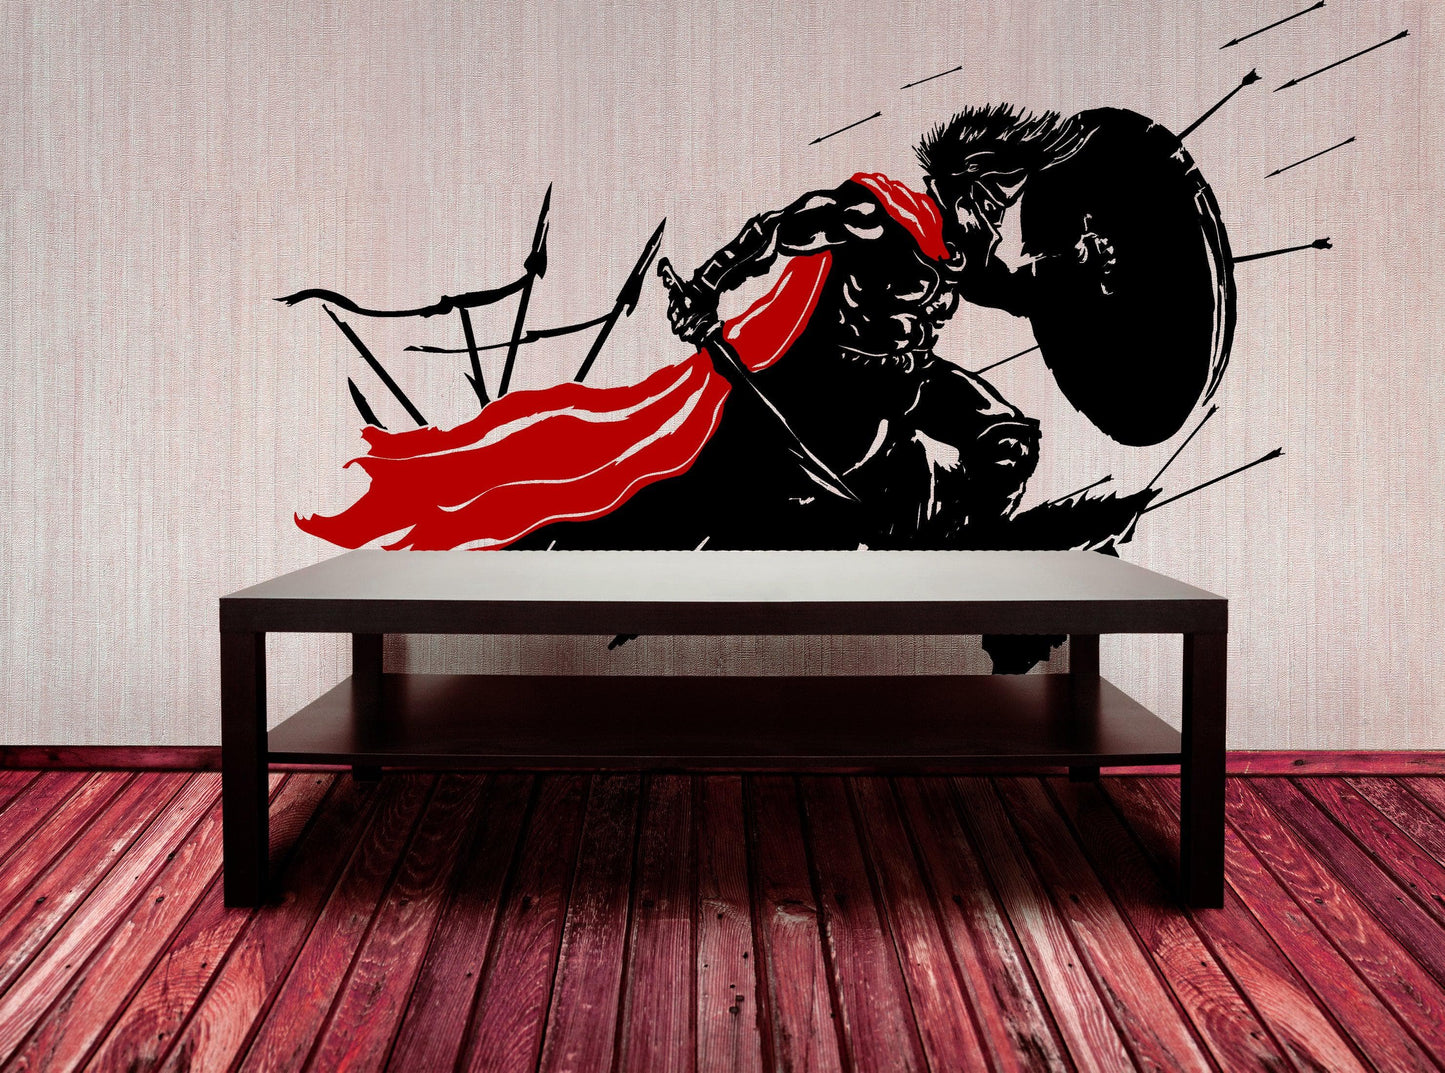 Spartan in Battle Wall Decal. 300 Strong Armored Soldiers in War Design. #GFoster178